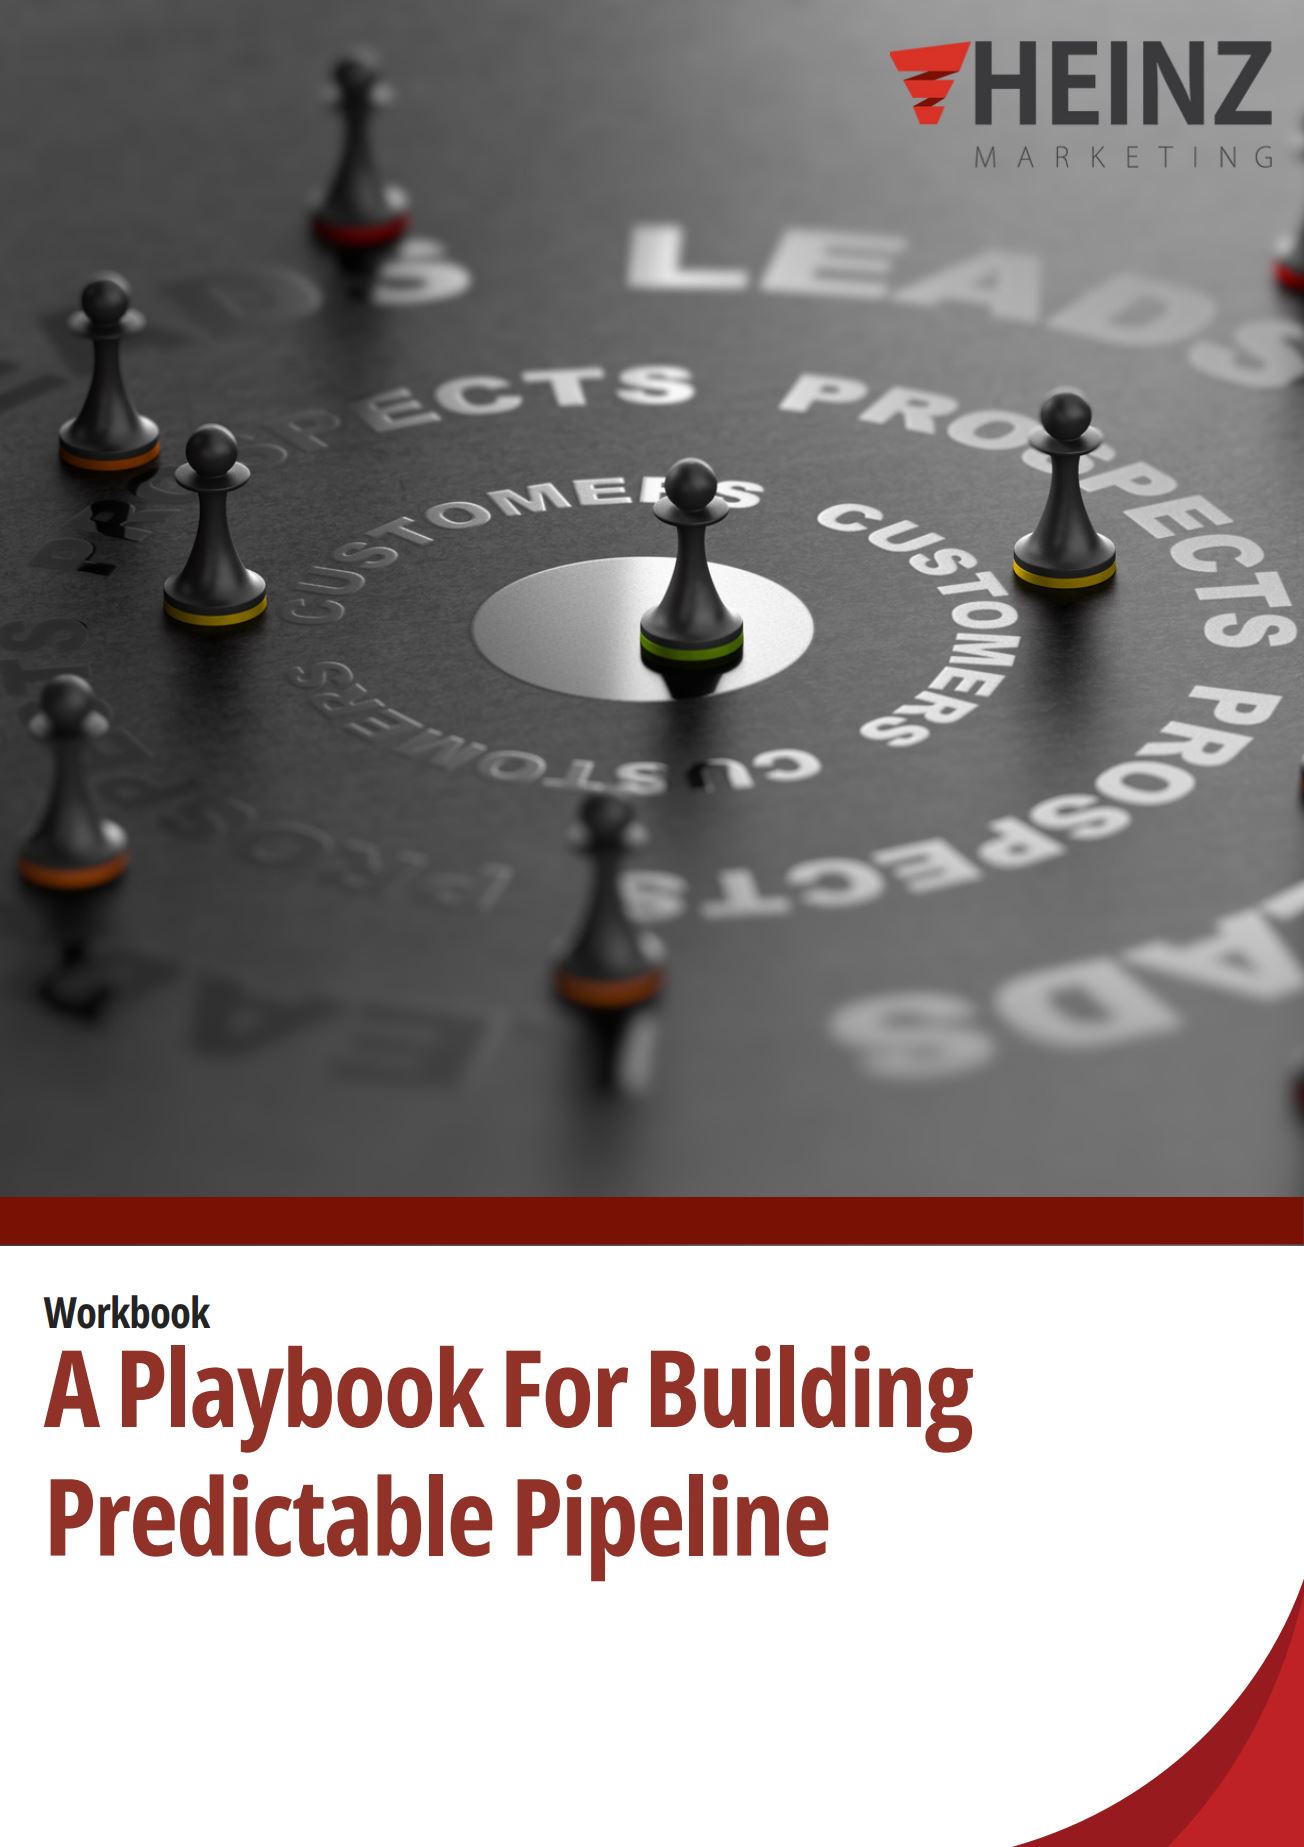 Workbook: A Playbook for Building Predictable Pipeline